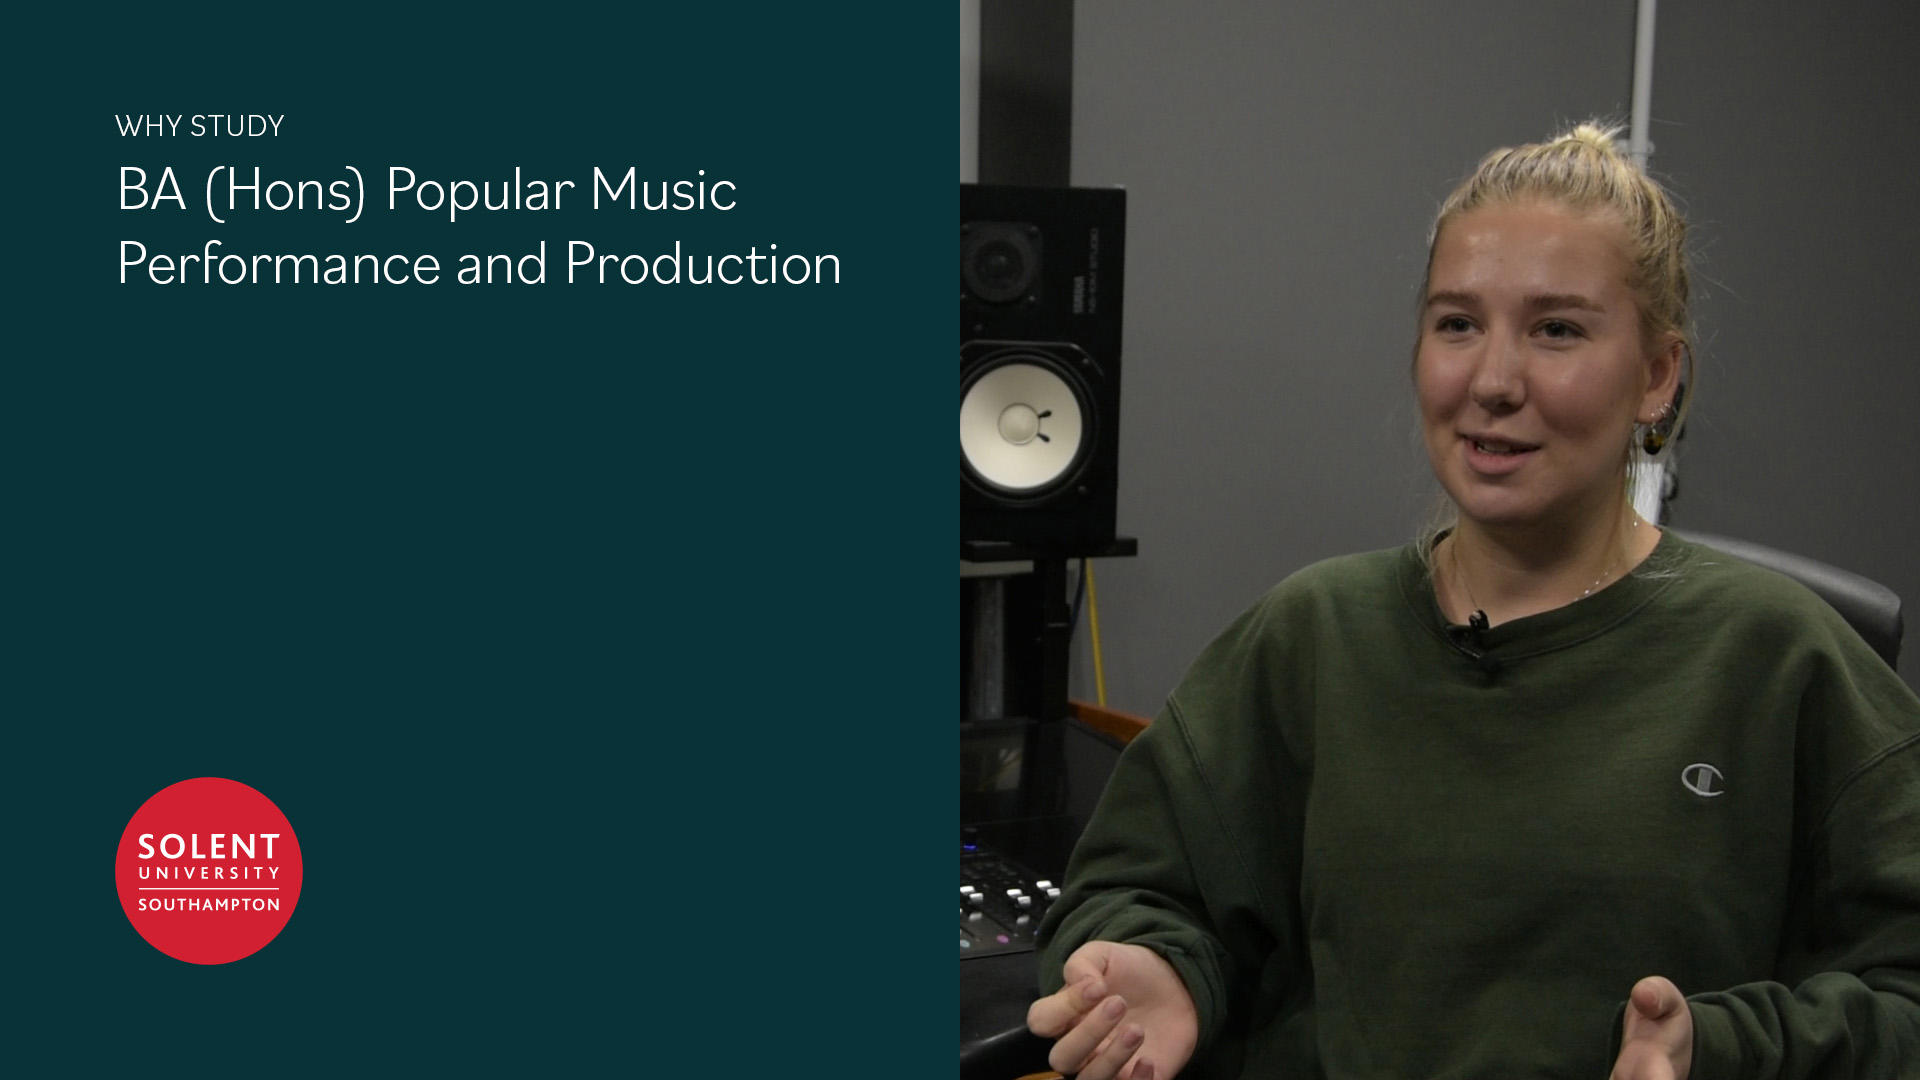 Image reads Why study BA (Hons) Popular Music Performance and Production